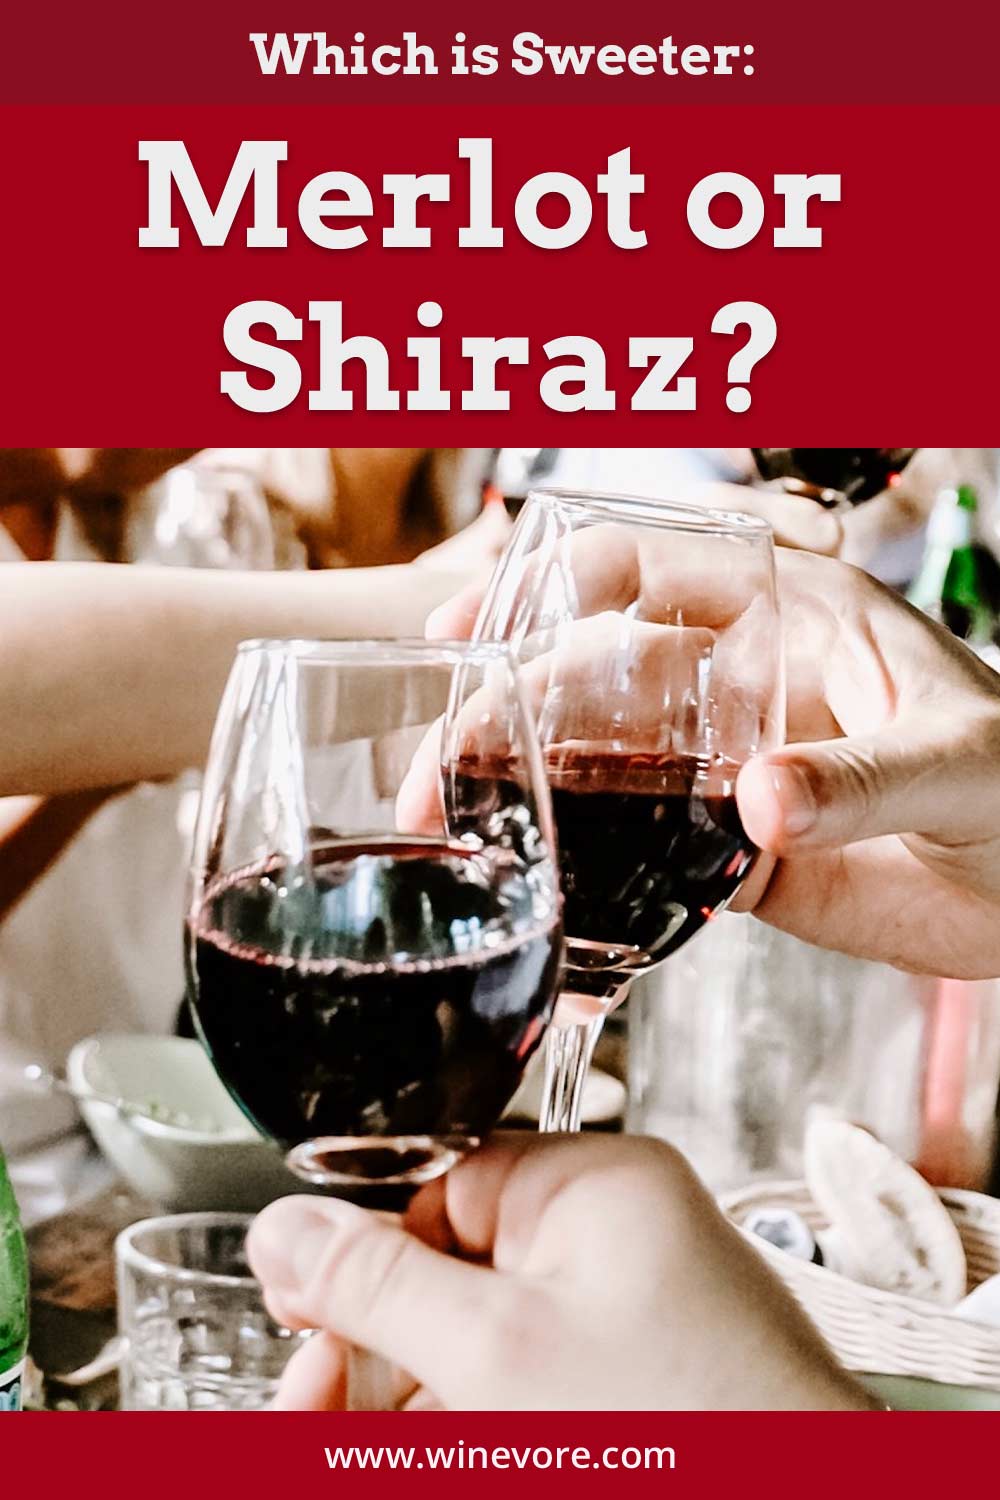 Hands clinking wine glasses - Which is Sweeter: Merlot or Shiraz?